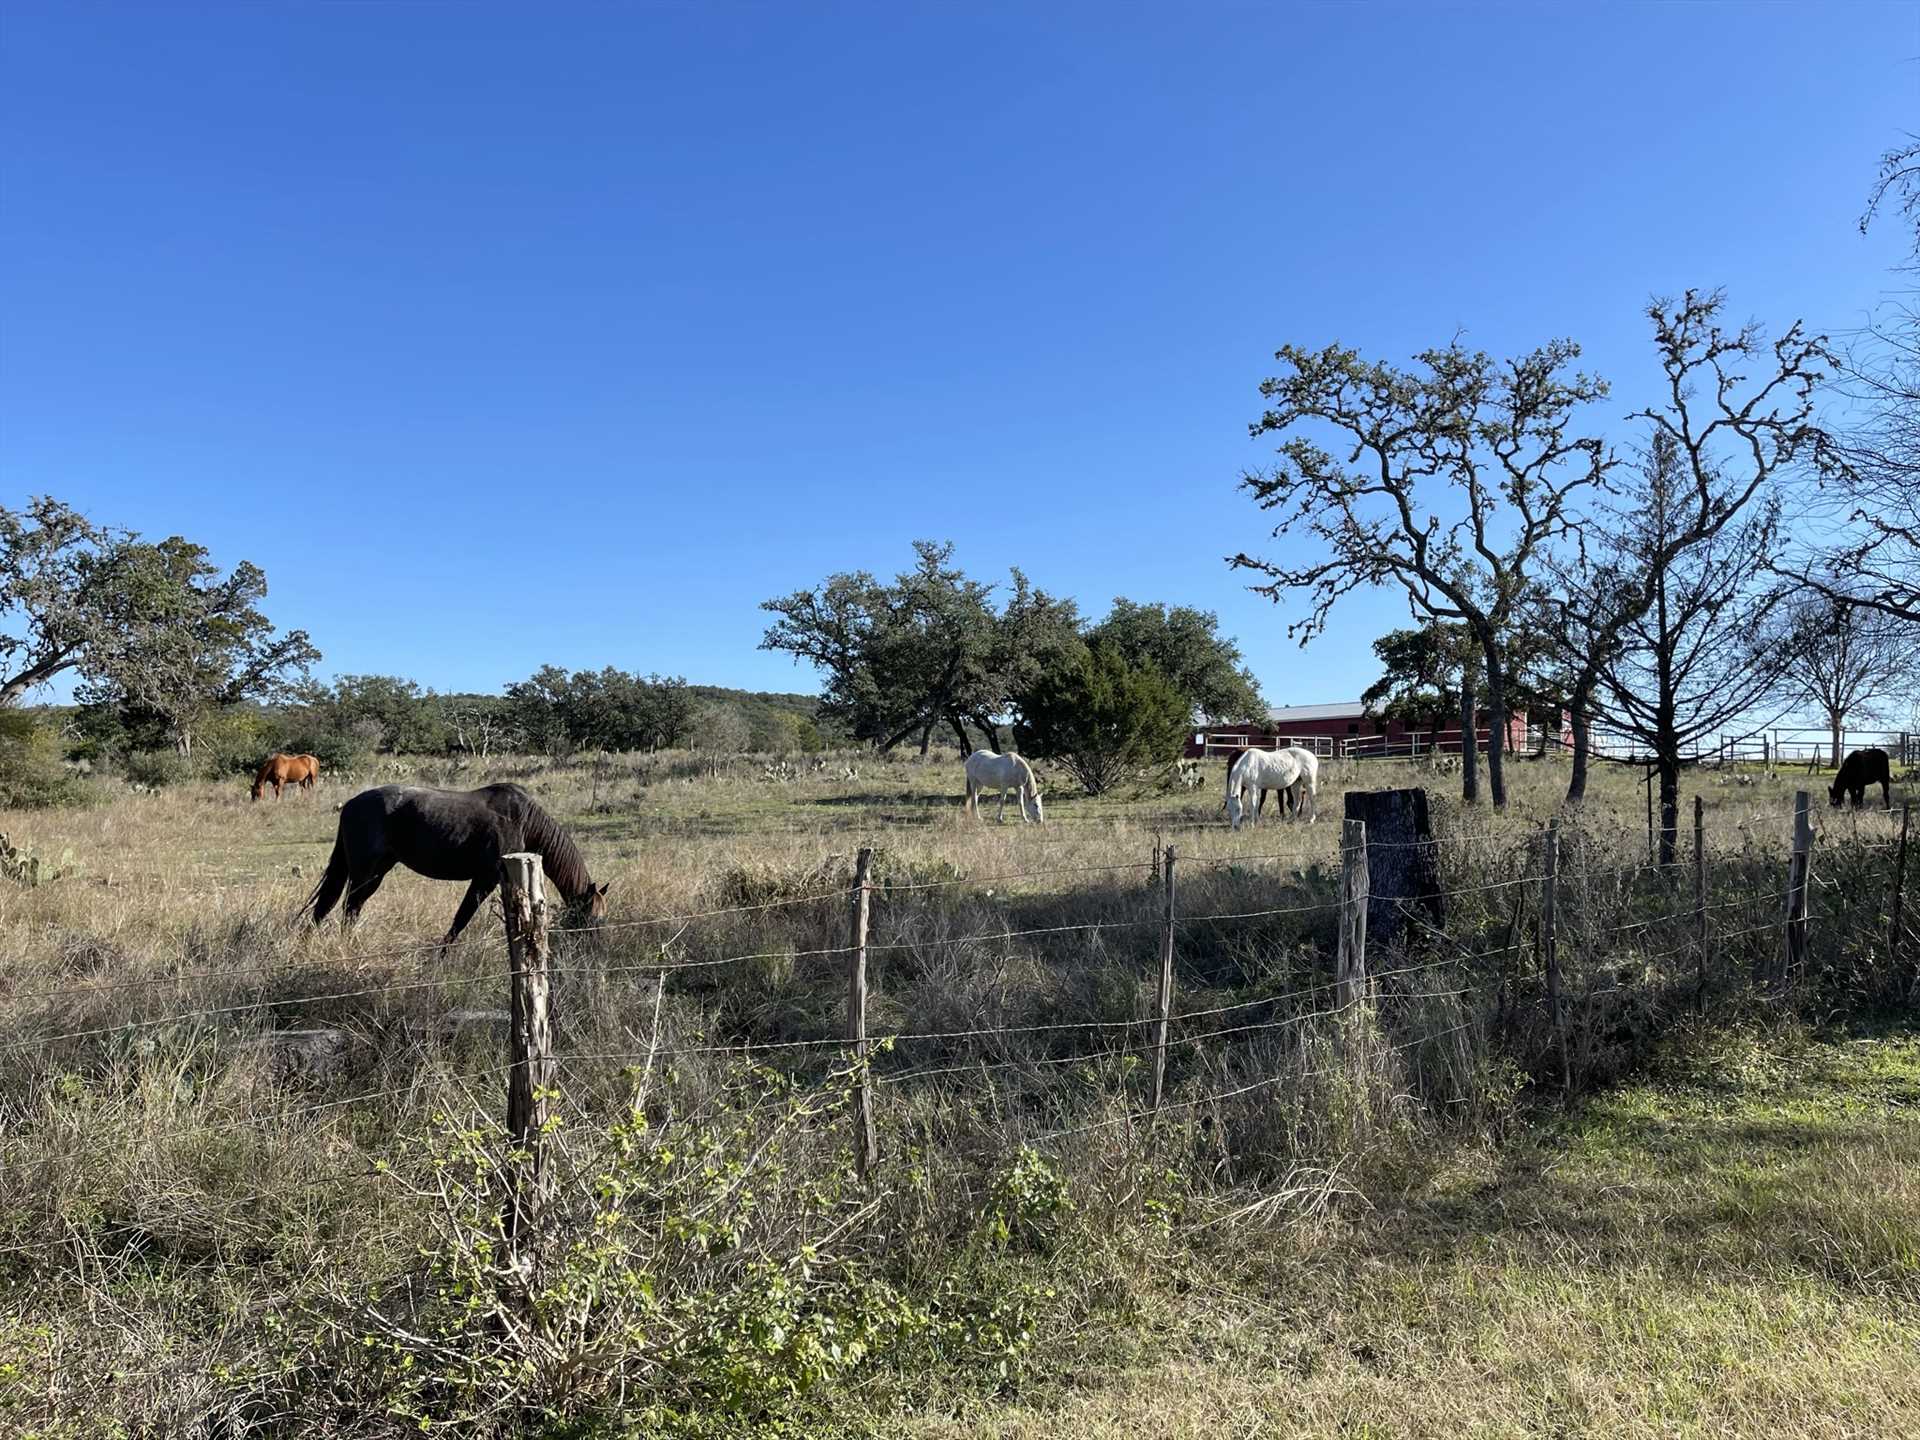                                                 Juniper Hill Stables shares the property at West 1077 Guest Ranch, and they offer trail riding packages. Ask us about boarding your own horse, too!